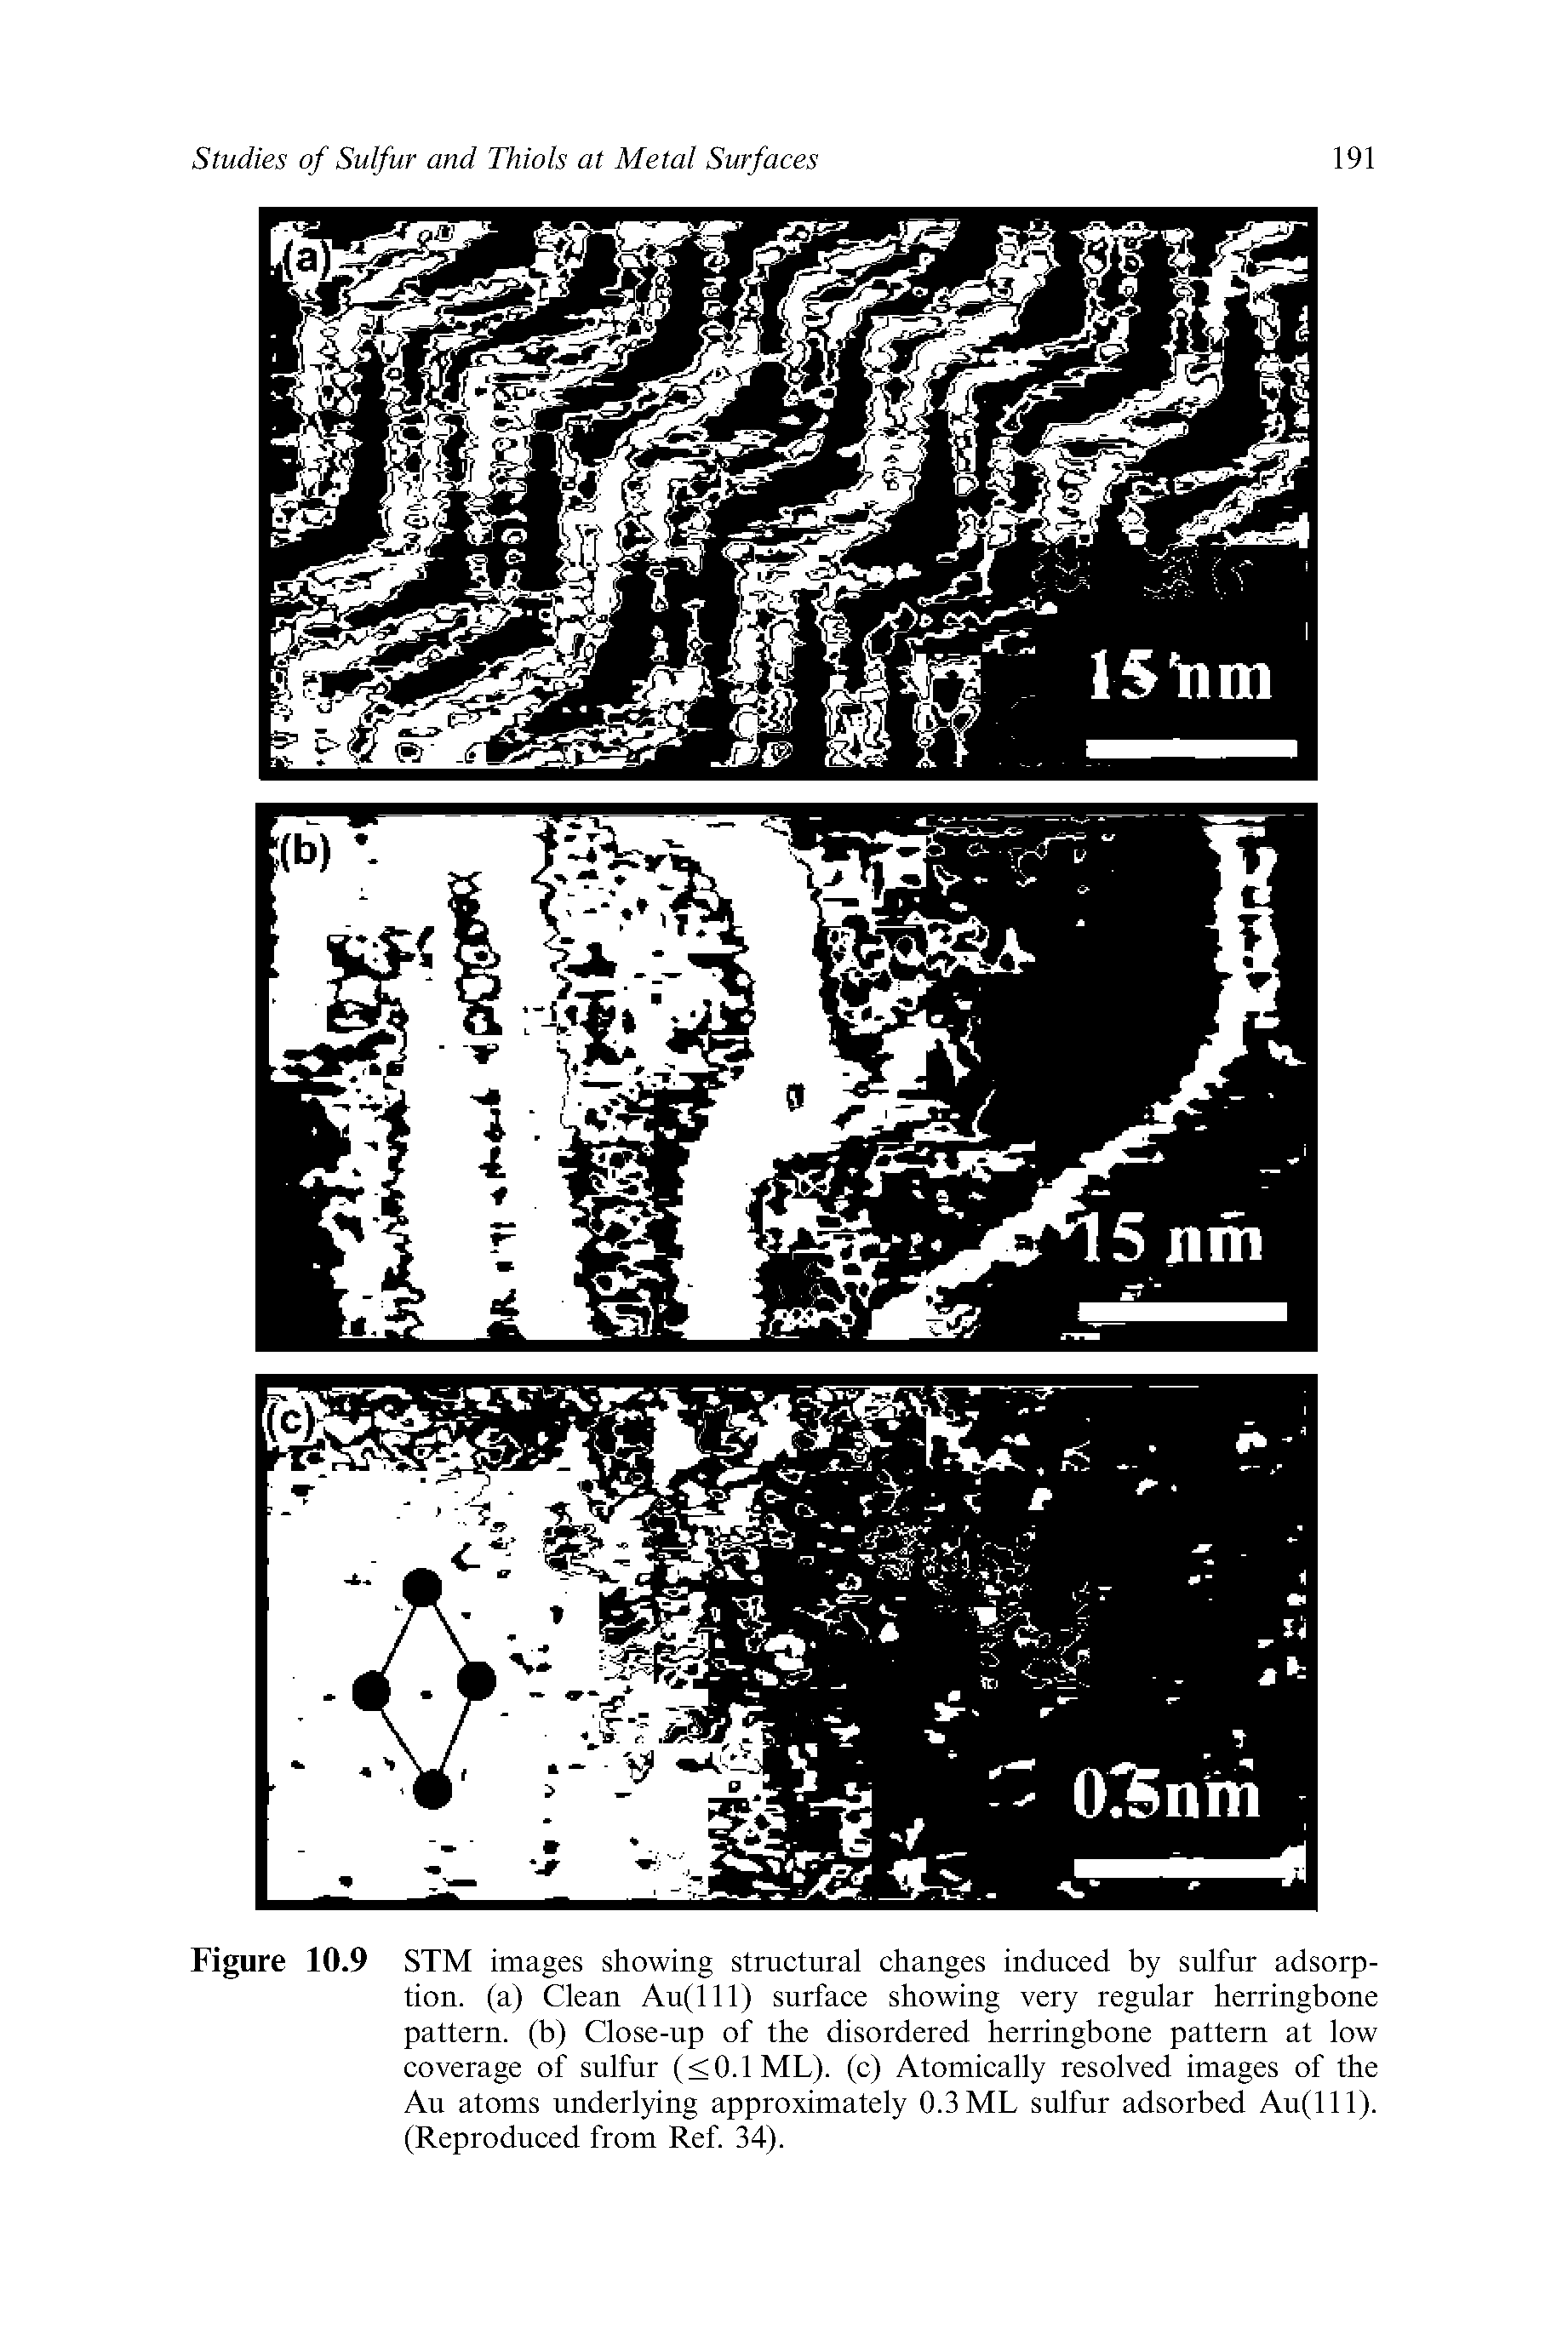 Figure 10.9 STM images showing structural changes induced by sulfur adsorption. (a) Clean Au(lll) surface showing very regular herringbone pattern, (b) Close-up of the disordered herringbone pattern at low coverage of sulfur (<0.1ML). (c) Atomically resolved images of the Au atoms underlying approximately 0.3 ML sulfur adsorbed Au(lll). (Reproduced from Ref. 34).